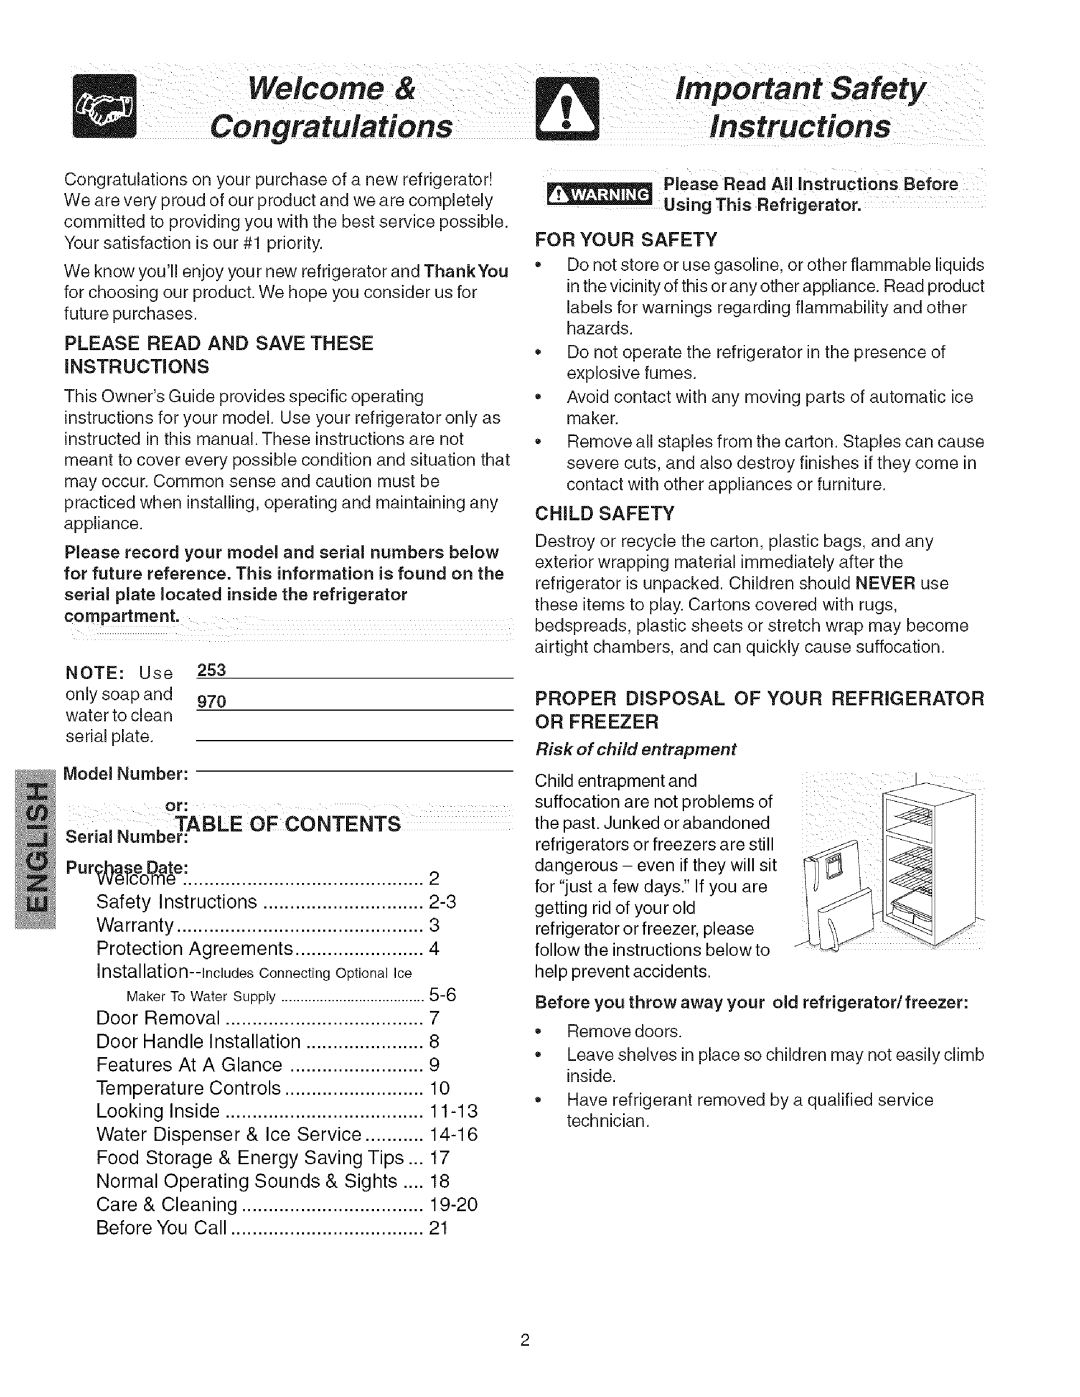 Kenmore 241858201 manual Welcome, Important Safety, Congratulations, Instructions, S, TABLE OF CONTENTS erial Number 